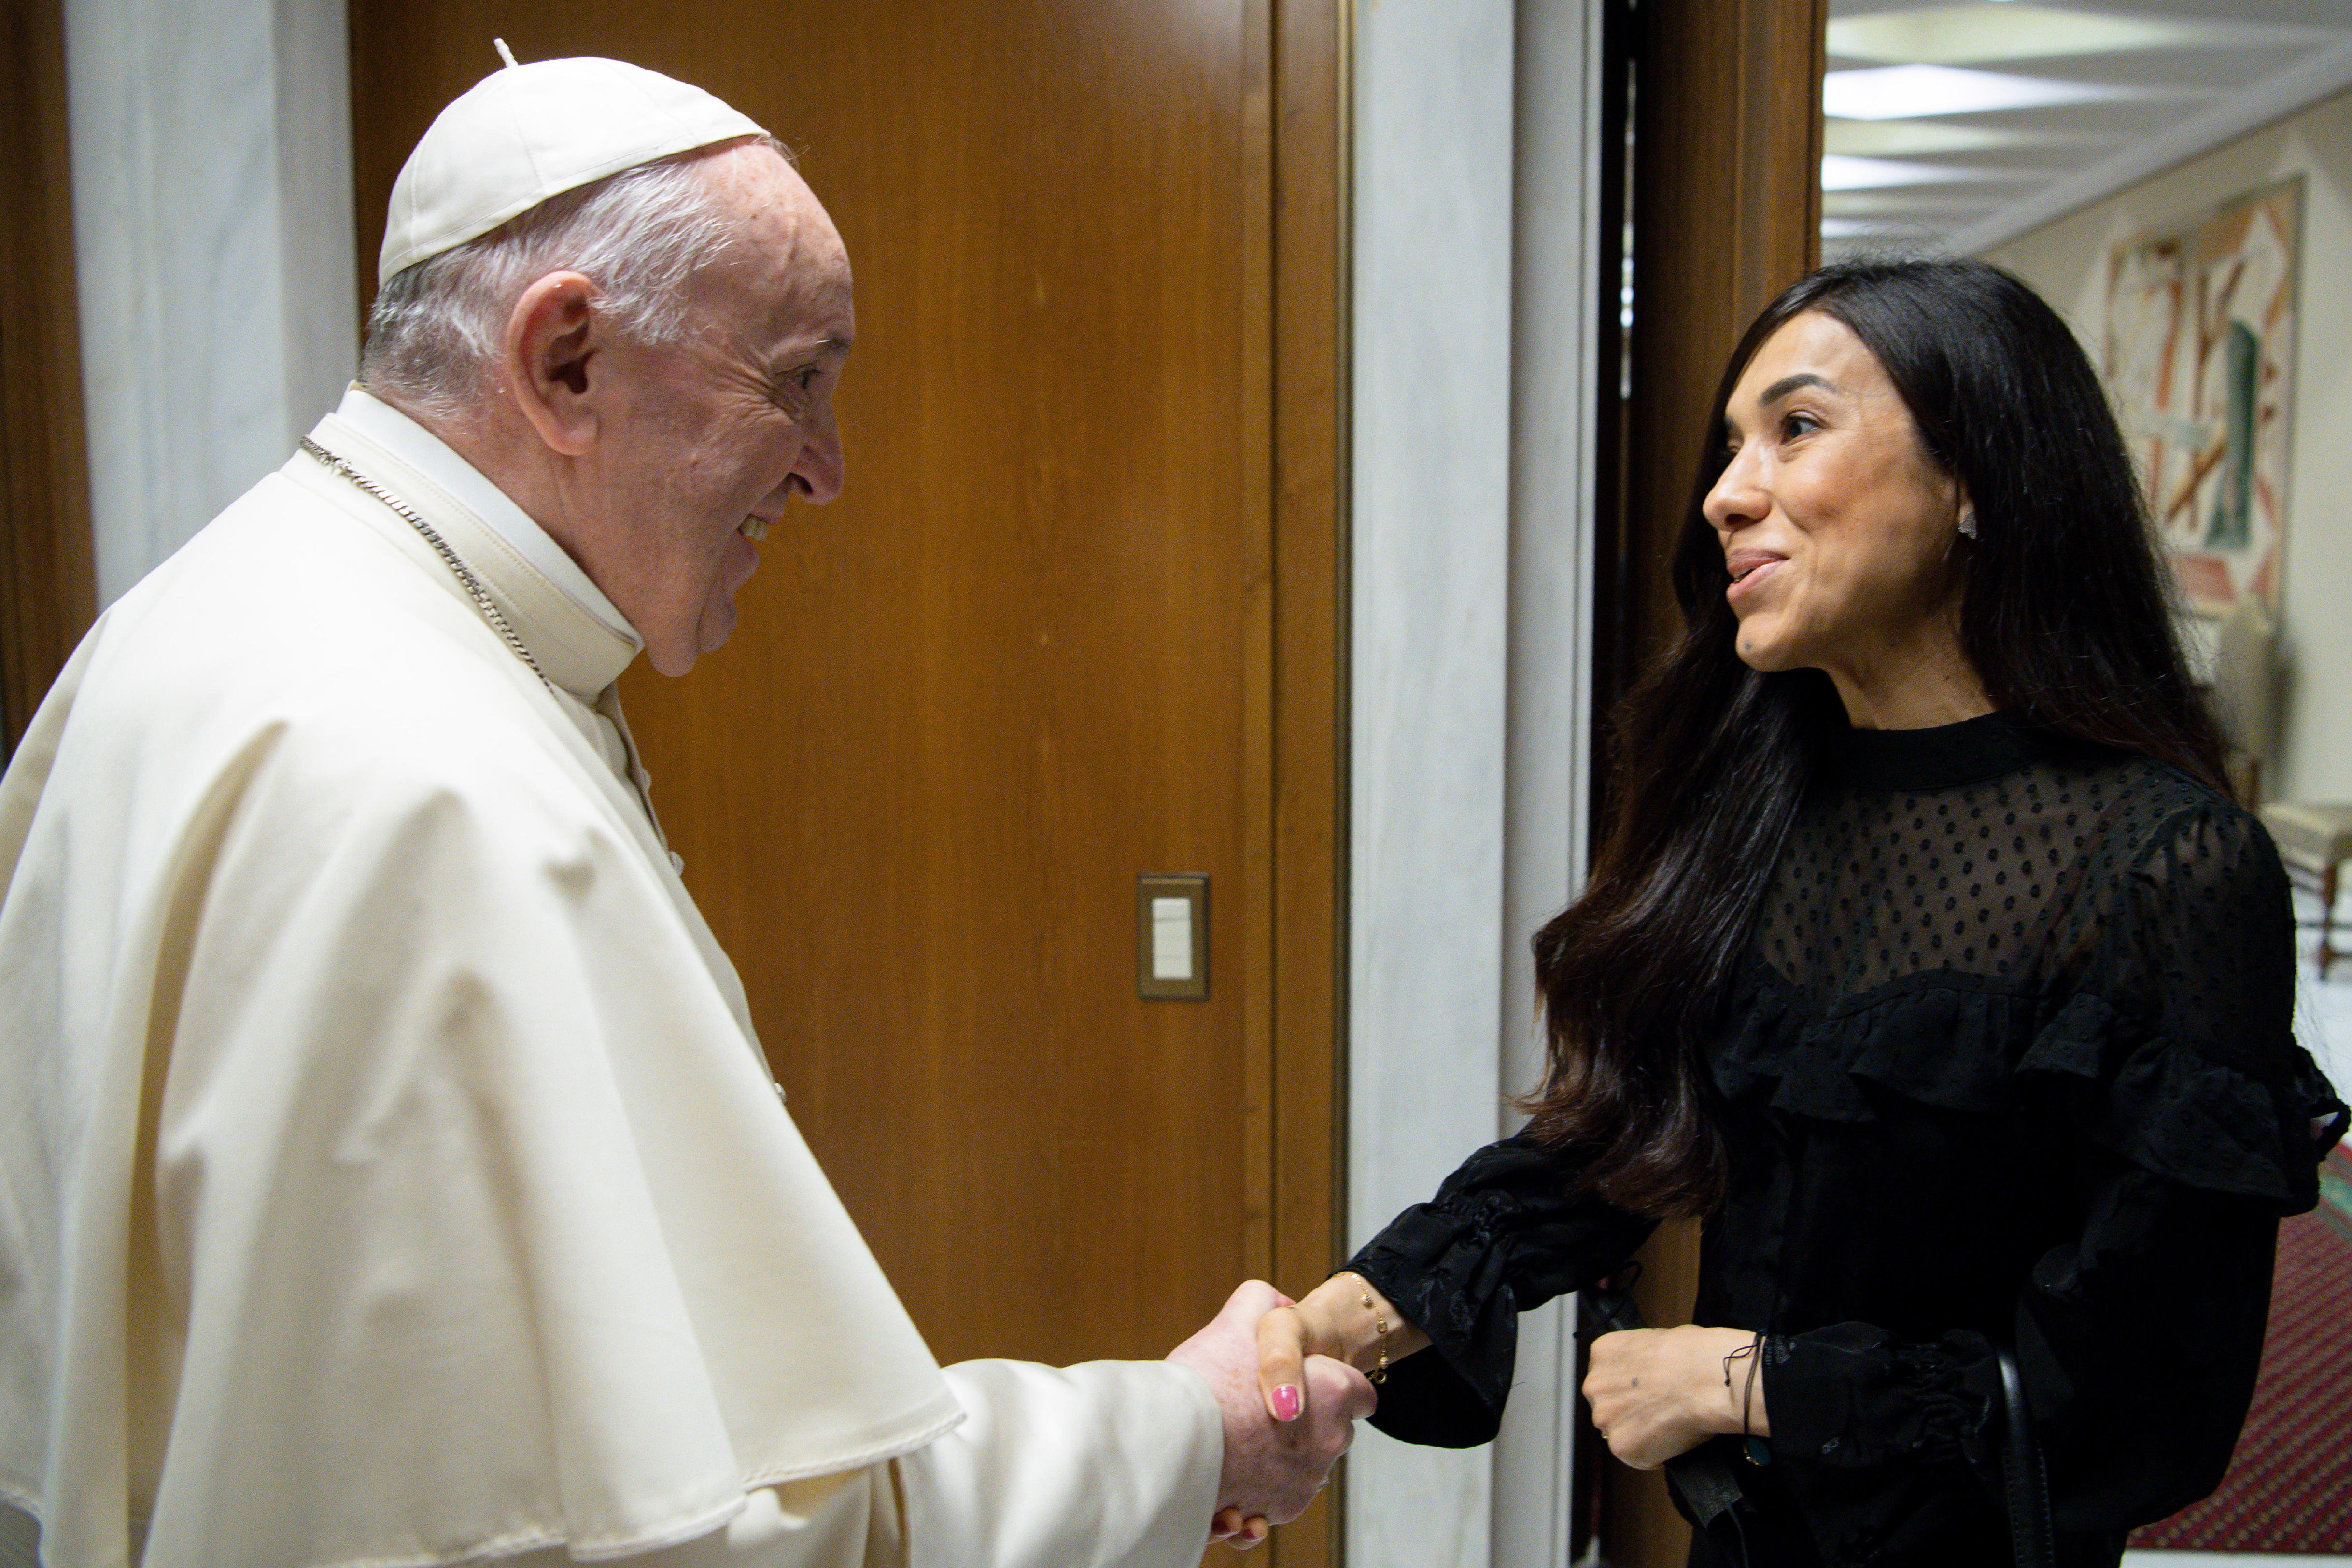 Pope Francis meets with Nobel Peace Prize laureate Nadia Murad during a private meeting at the Vatican Aug. 26, 2021. Murad was kidnapped by Islamic State militants in Iraq in 2014 during a genocidal campaign against the Yazidi people. (CNS photo/Vatican 